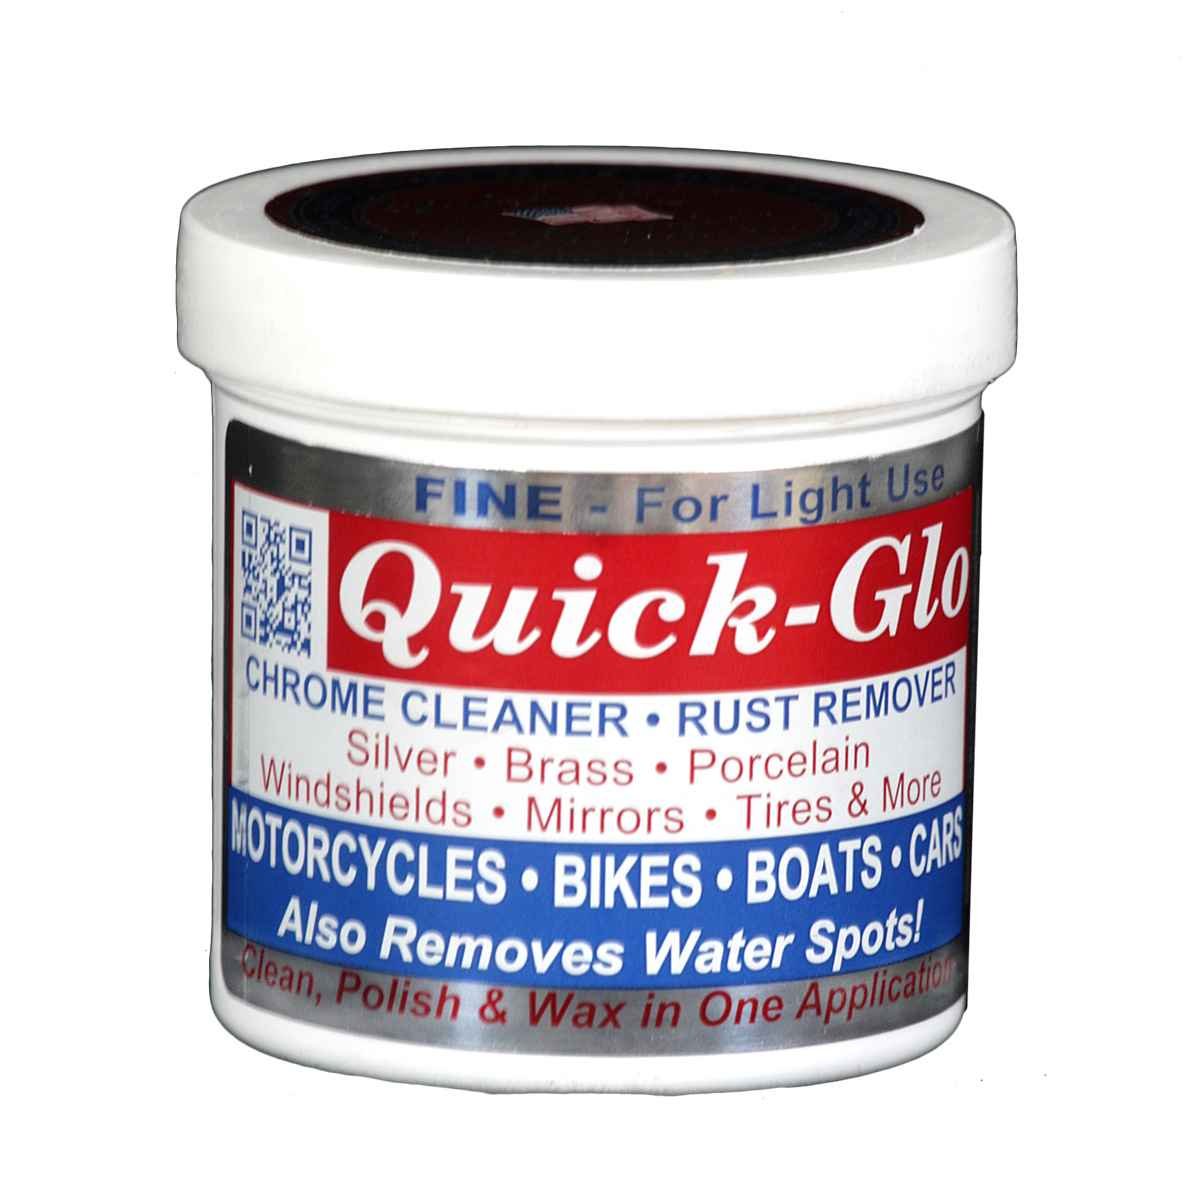 10. Quickway Brands Chrome Cleaner